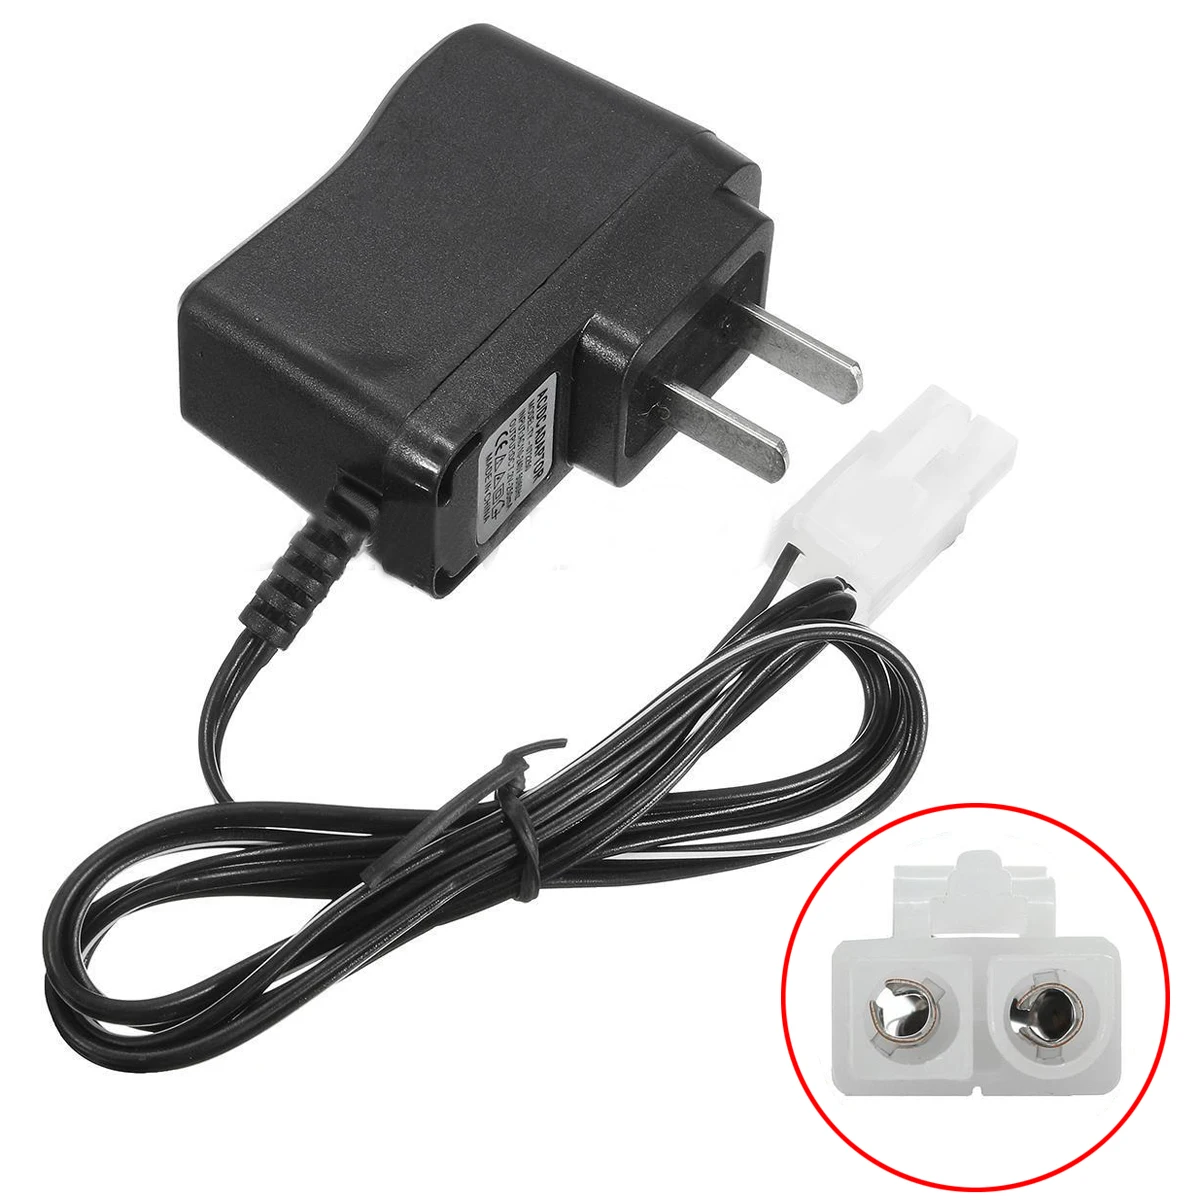 DC 3.6V-7.2V RC Battery Pack Wall Charger Adapter For Remote Control Car aq 